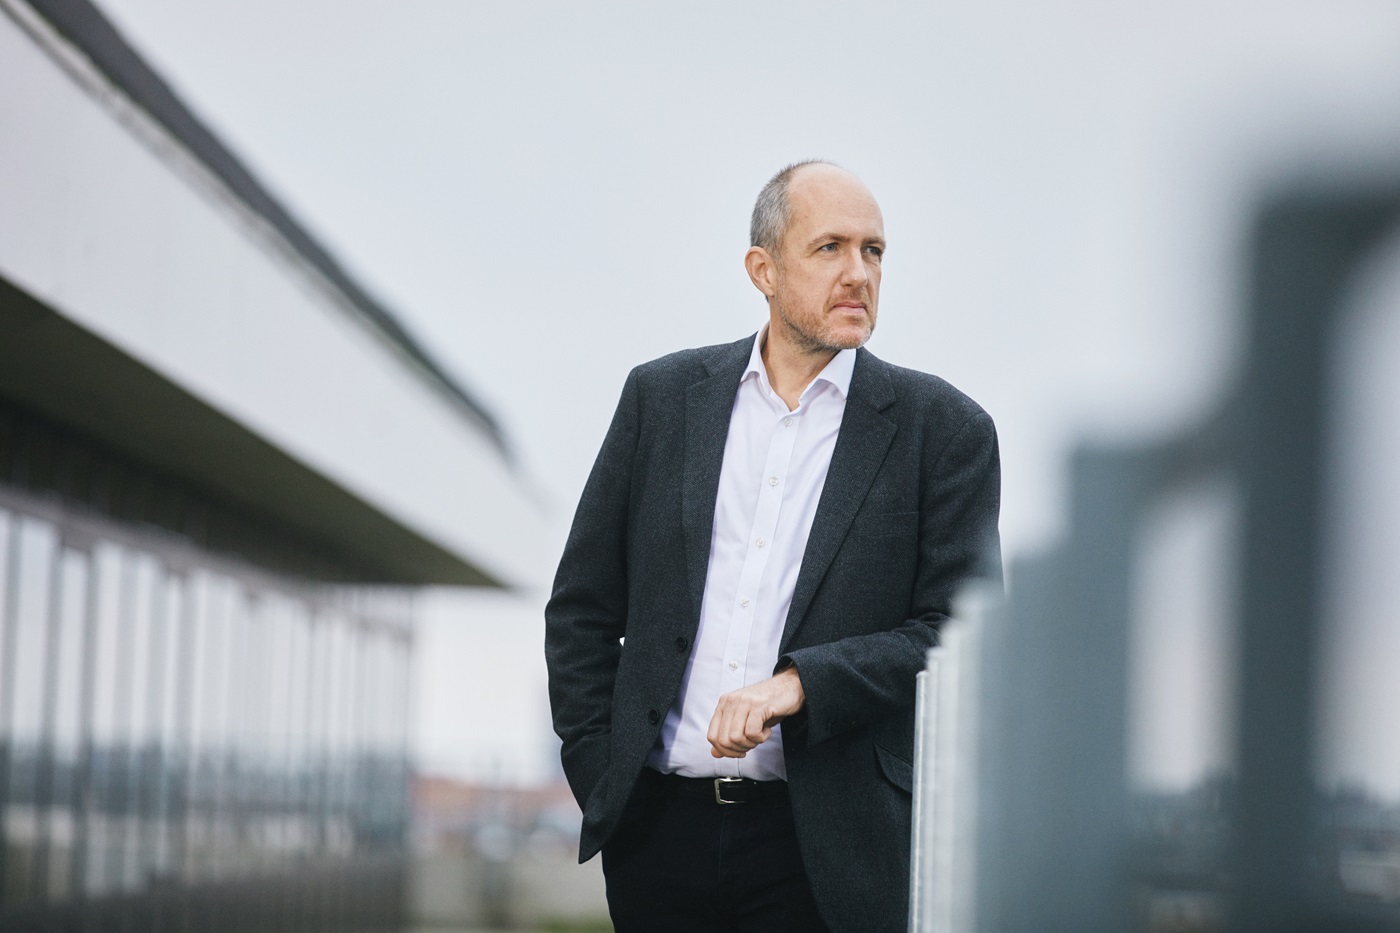 Portrait for news story of Claus Bunkenborg, MobilePay CEO